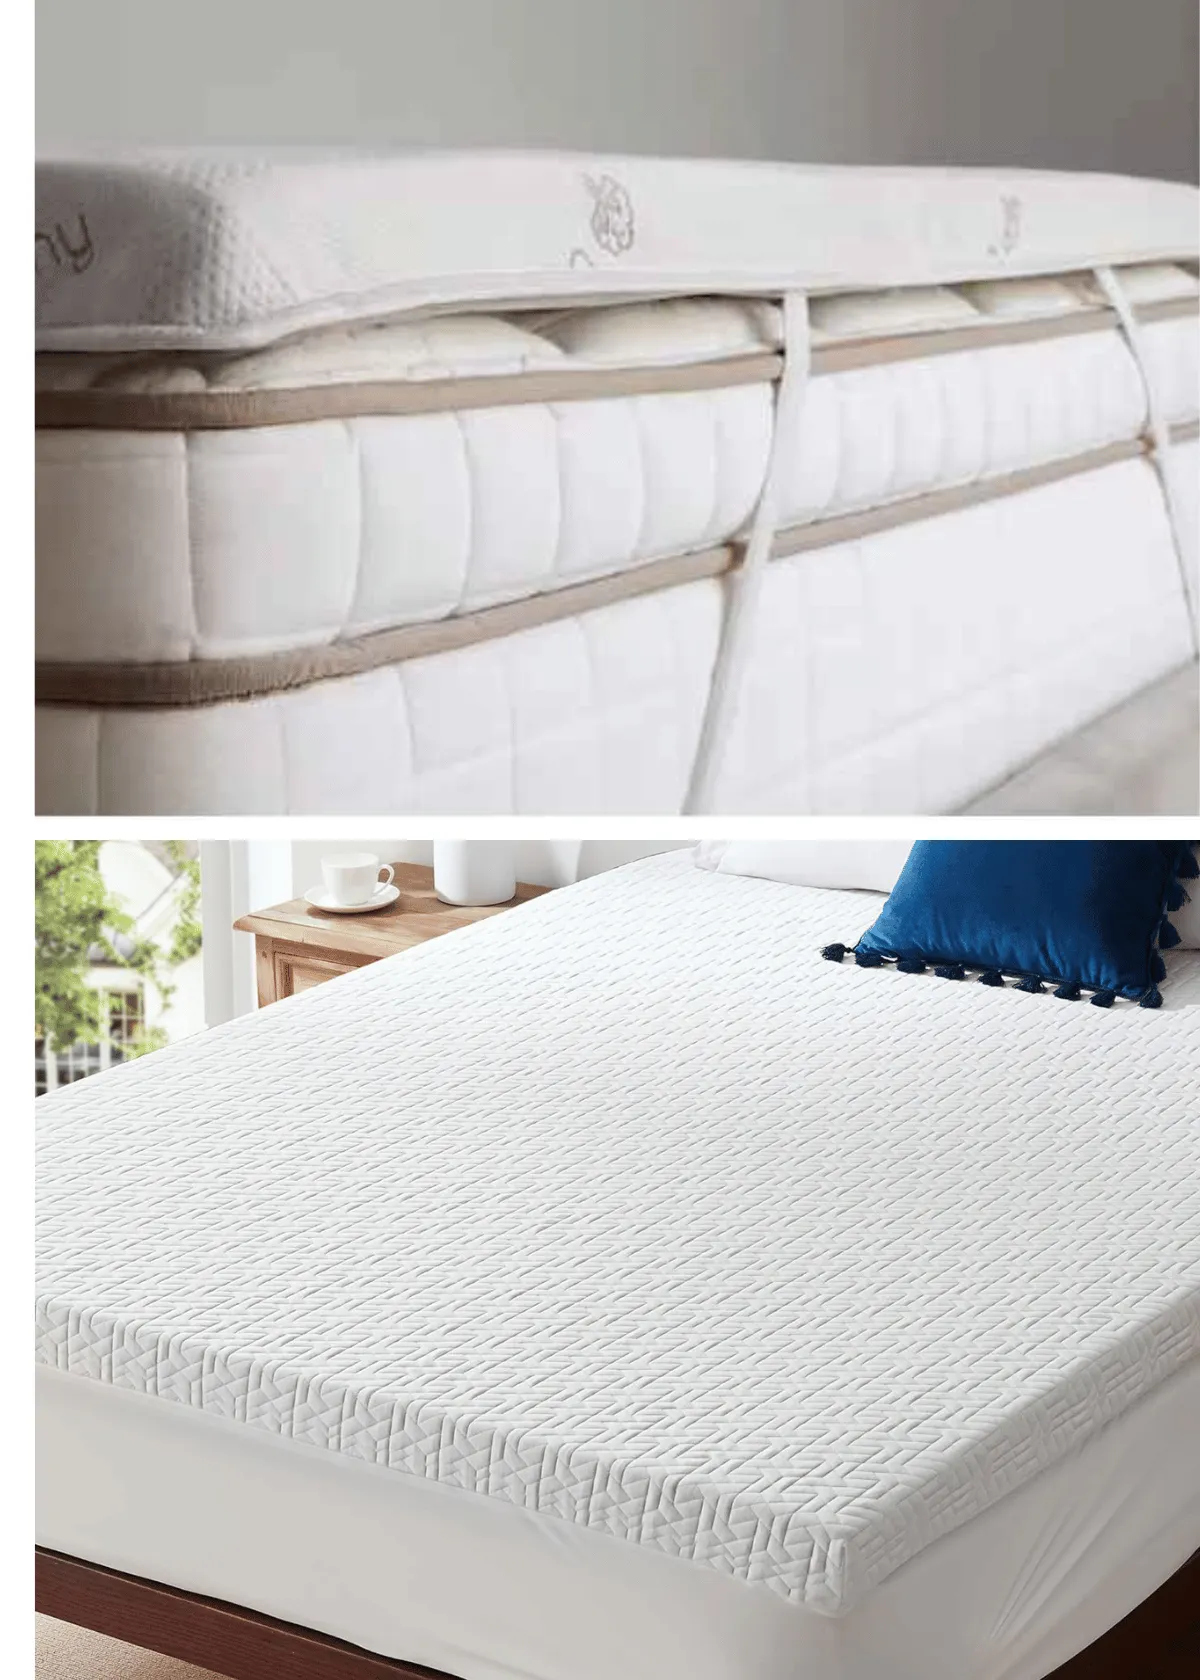 "Cooling Mattress Topper for Hot Sleepers (15 Best Comfy Covers to Stay Asleep)"